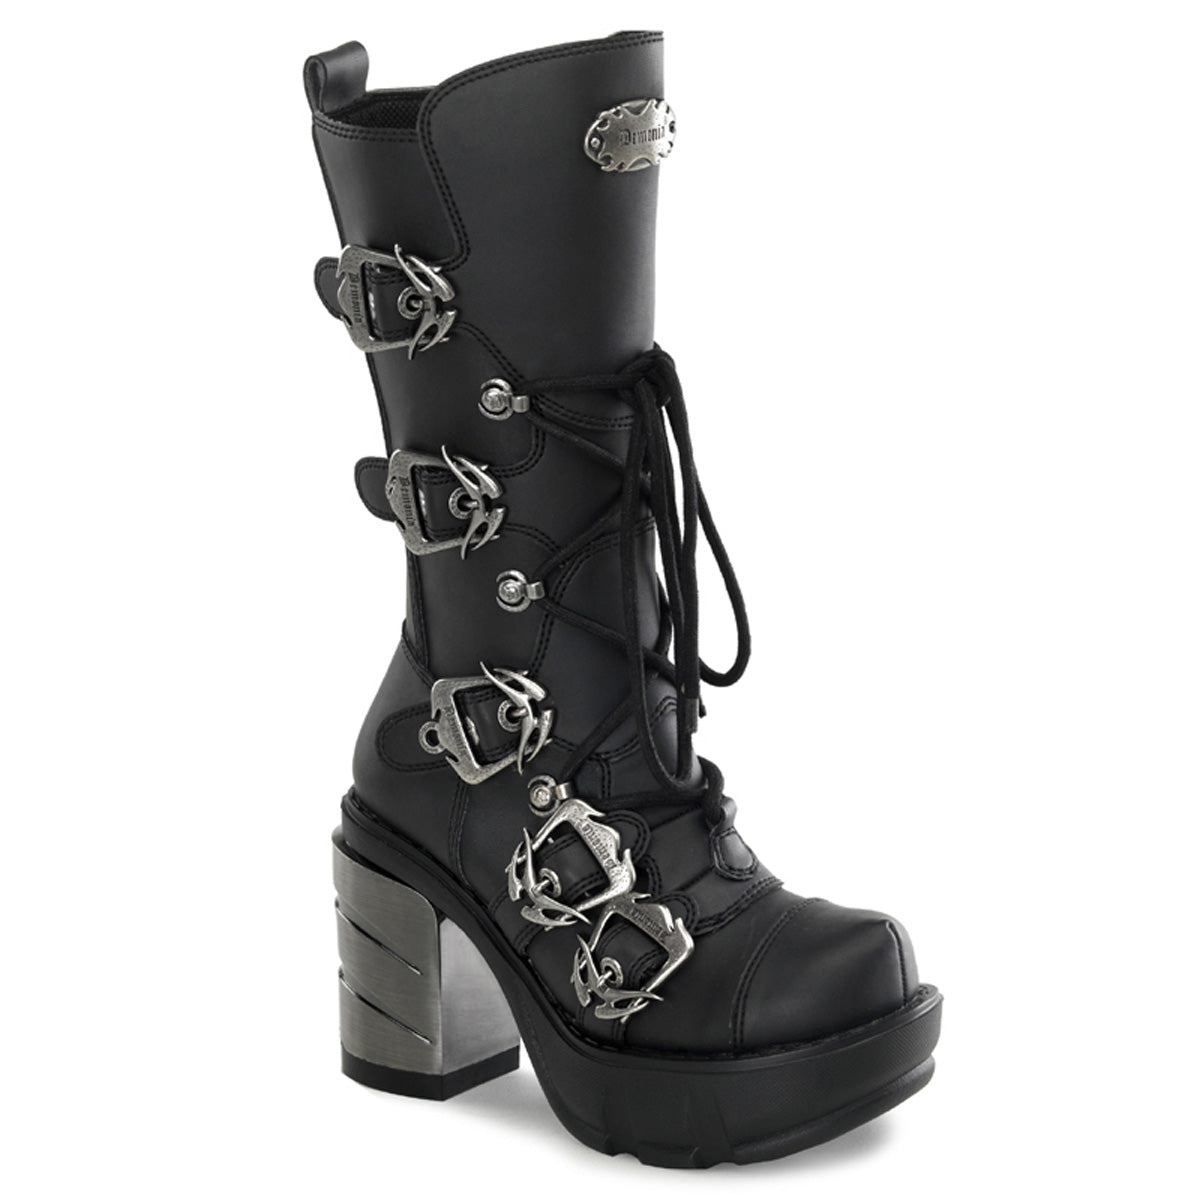 DemoniaCult Womens Boots SINISTER-203 Blk Vegan Leather